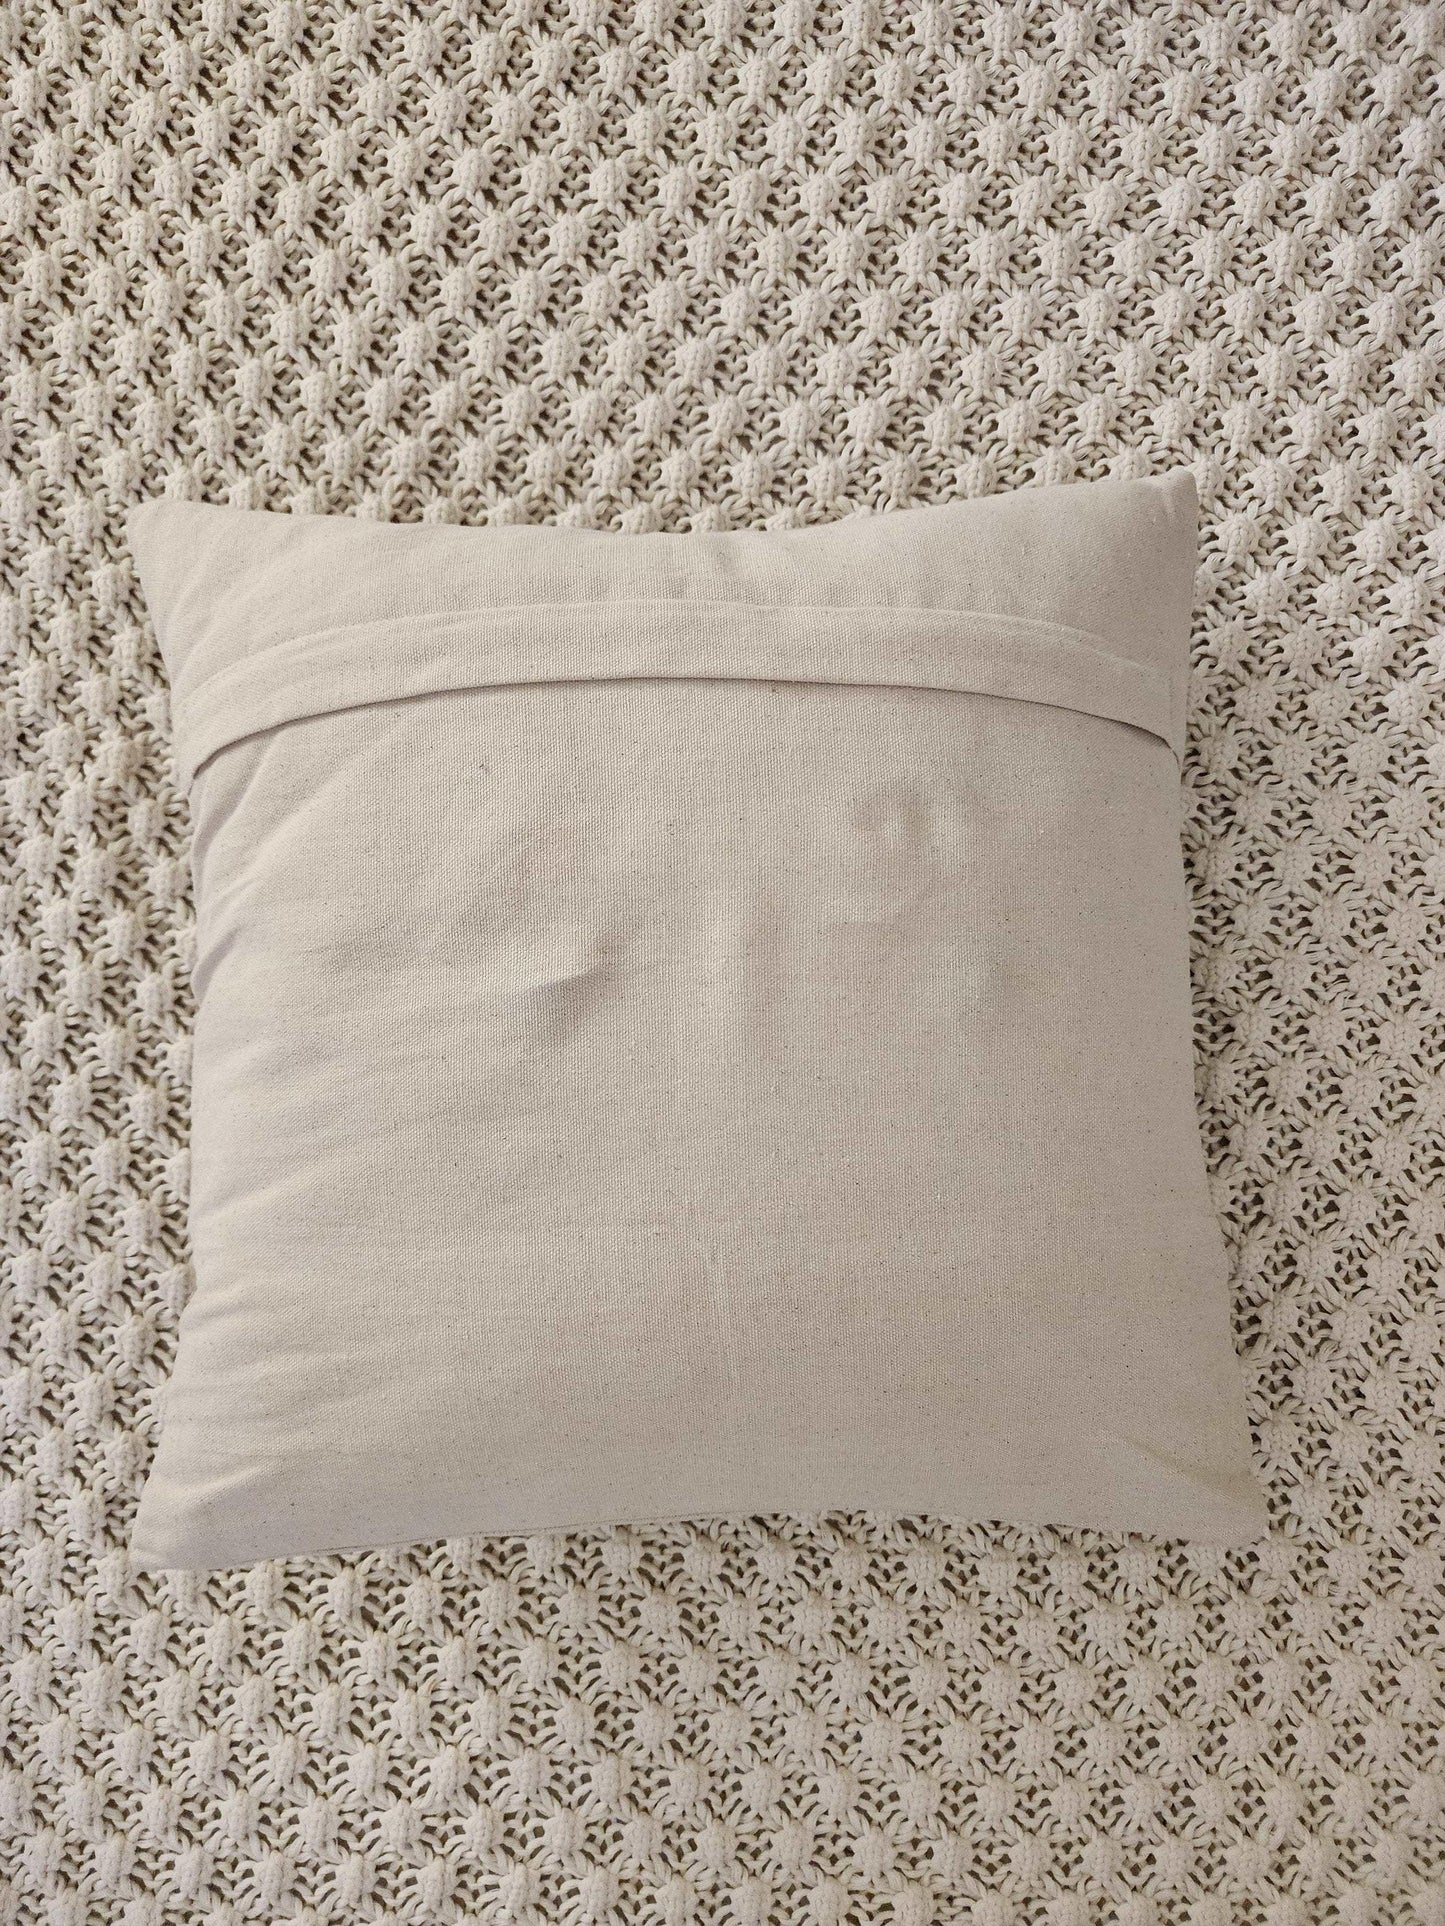 Five More Minutes Pillow Cover